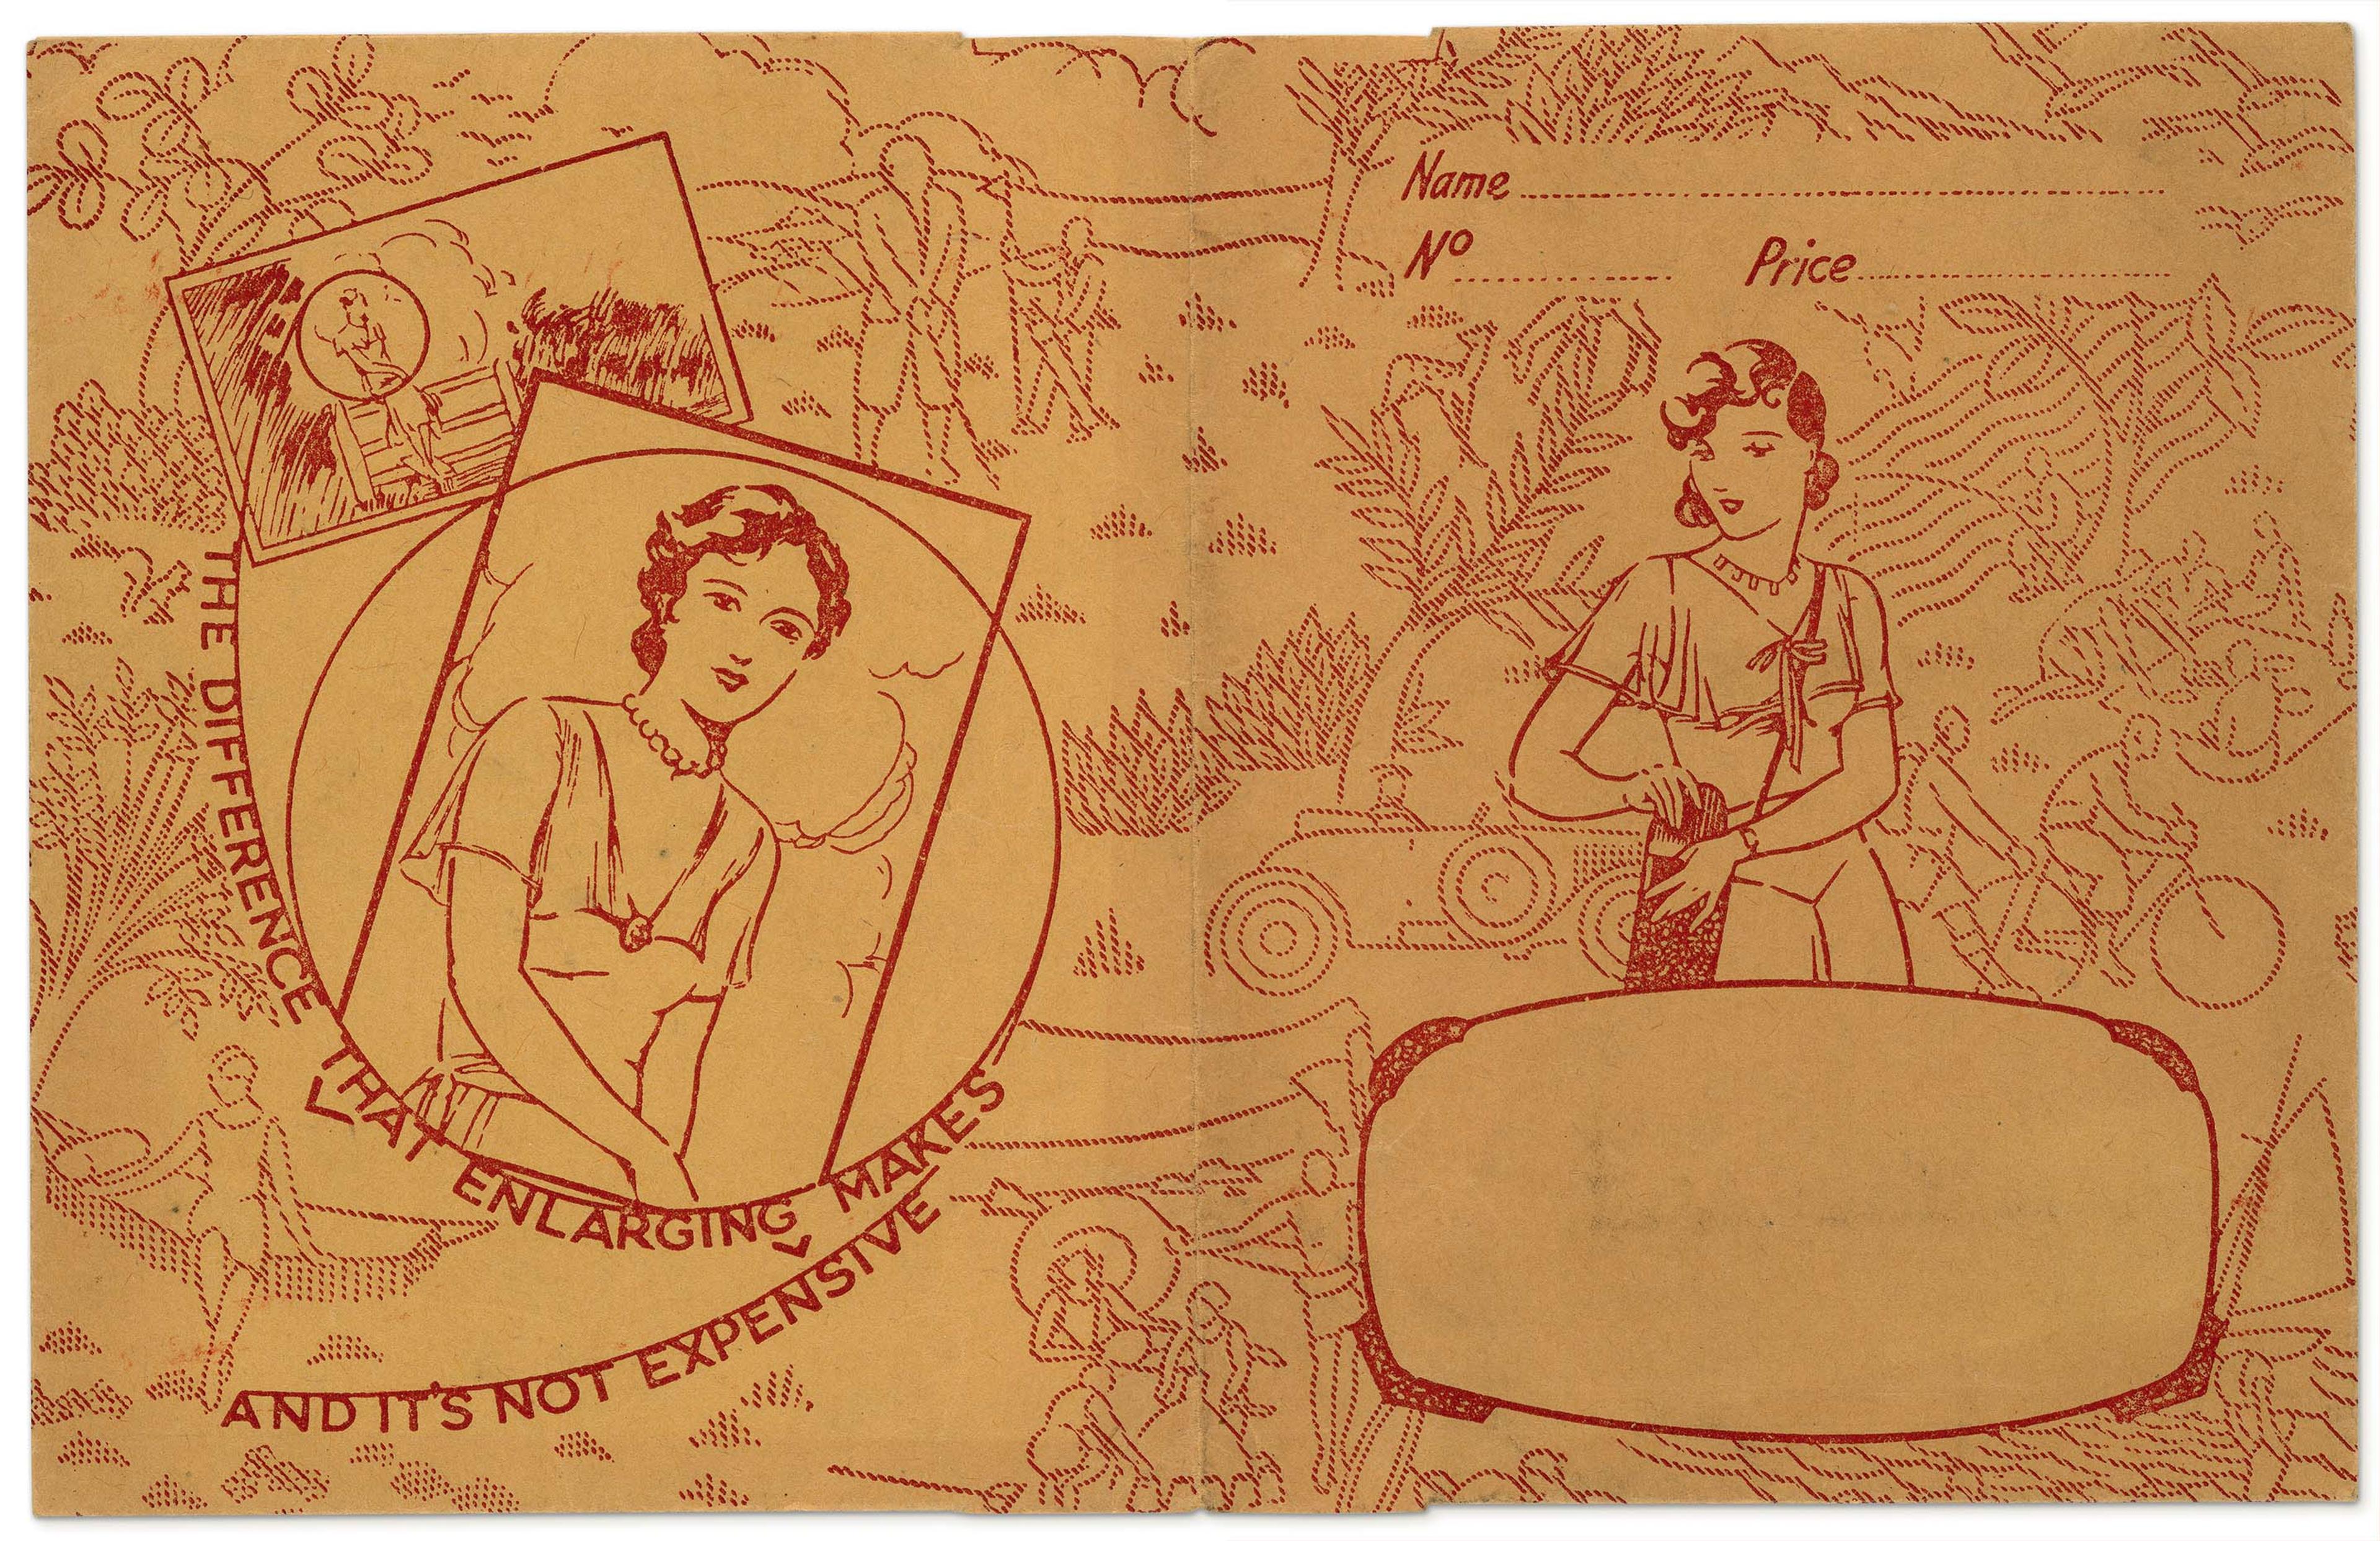 Photo of a beige envelope with red illustrations of the same person twice, with a background of people enjoying golf, cycling, sand castle building, relaxing and sailing.